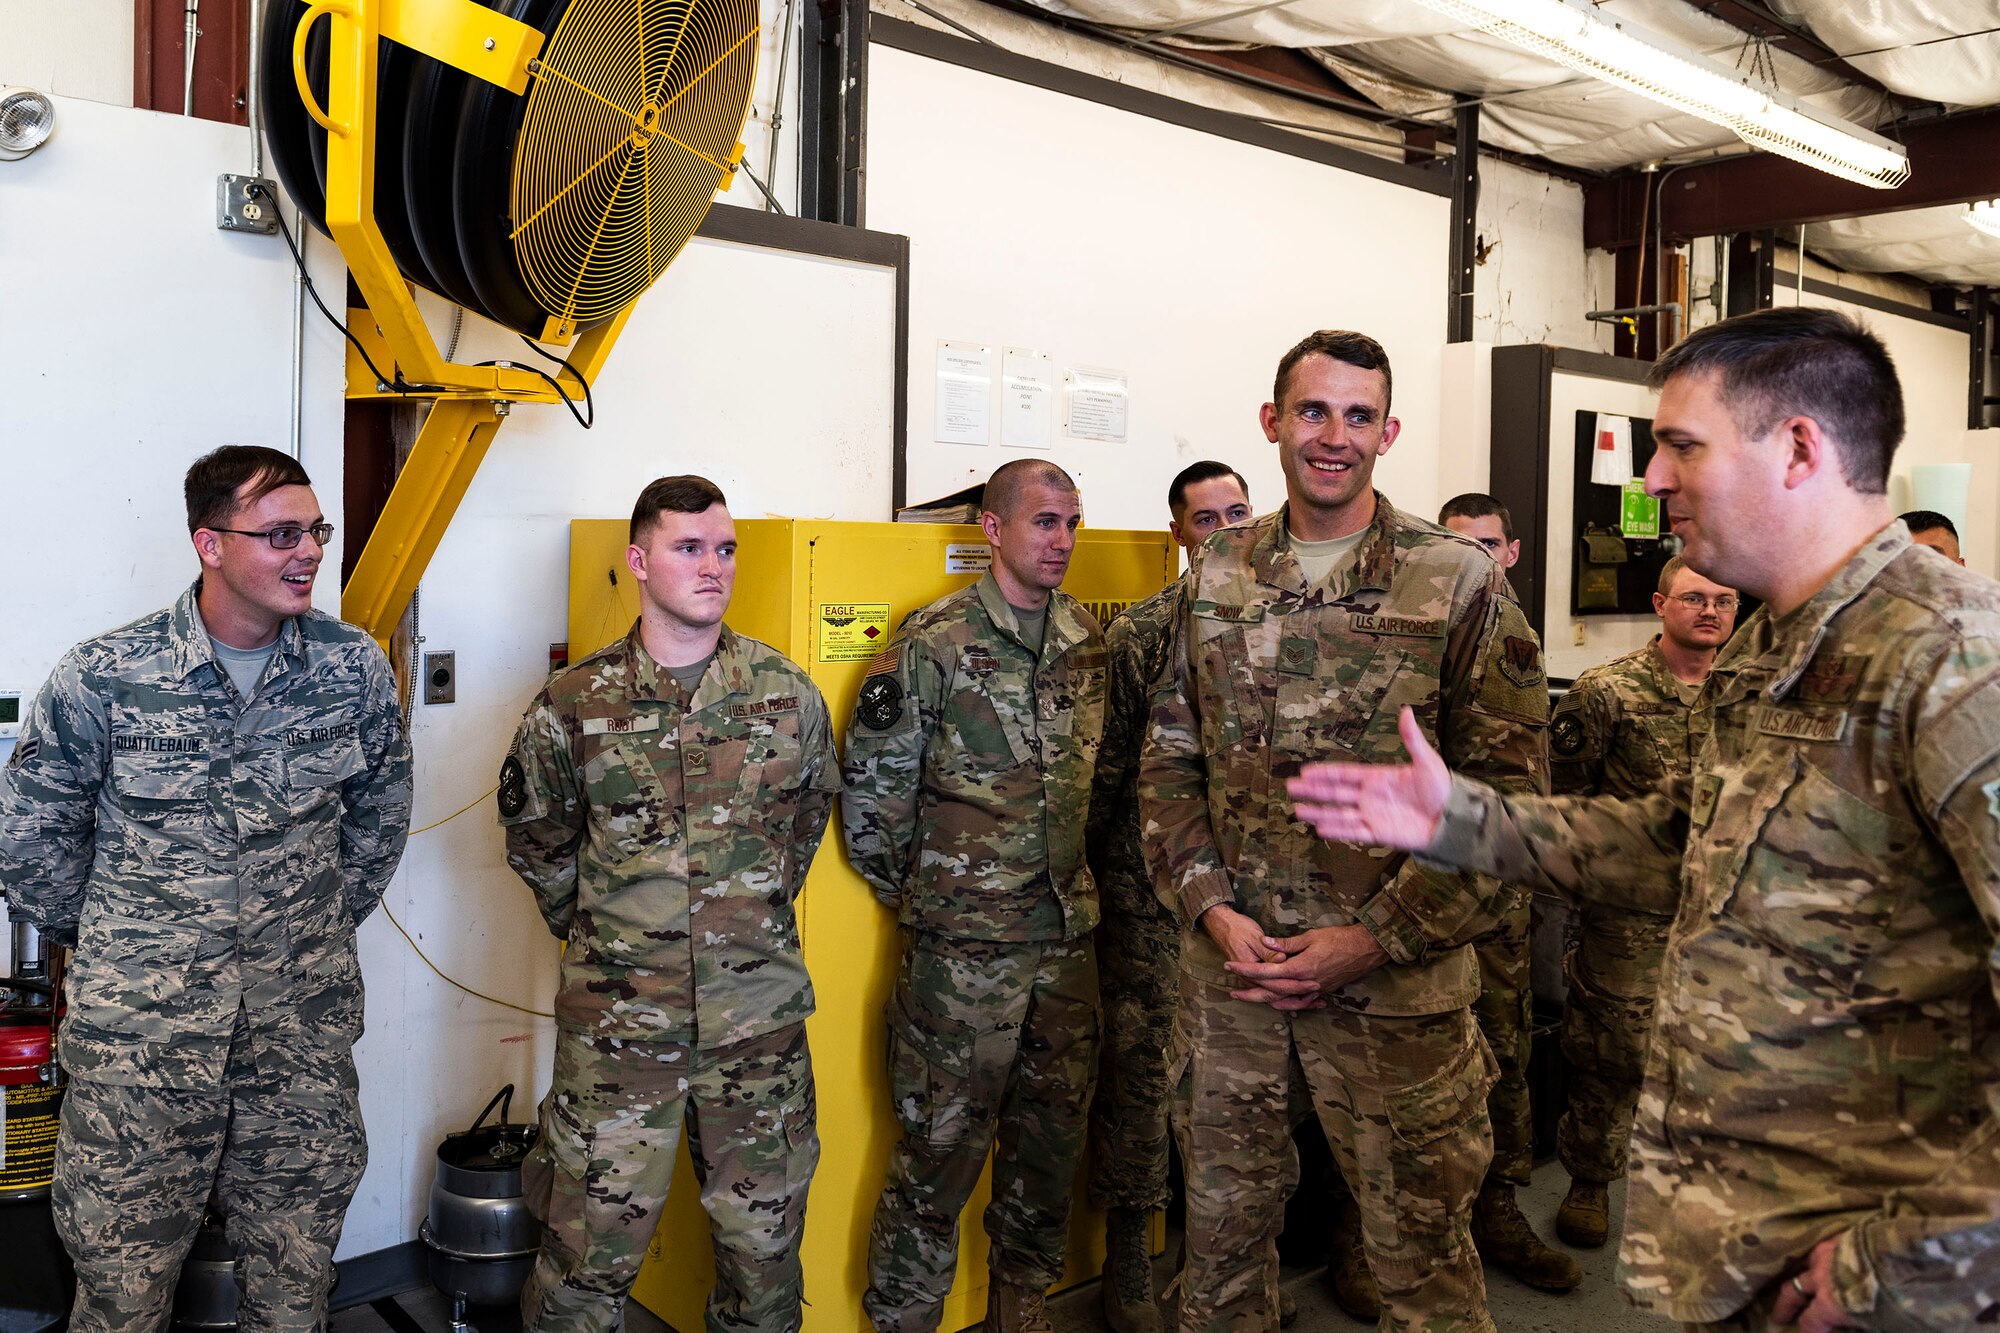 Col. Dan Walls, right, 23d Wing commander, speaks to Airman 1st Class Tyler Quattlebaum, far left, 23d Maintenance Squadron (MXS) munitions support equipment maintenance technician, during an immersion tour Oct. 28, 2019, at Moody Air Force Base, Ga. Walls toured the 23d MXS munitions flight facilities, where the Airmen showcased their squadron and mission. This gave Walls the opportunity to see how 23d MXS improves deployability and ensures mission readiness. (U.S. Air Force photo by Senior Airman Erick Requadt)